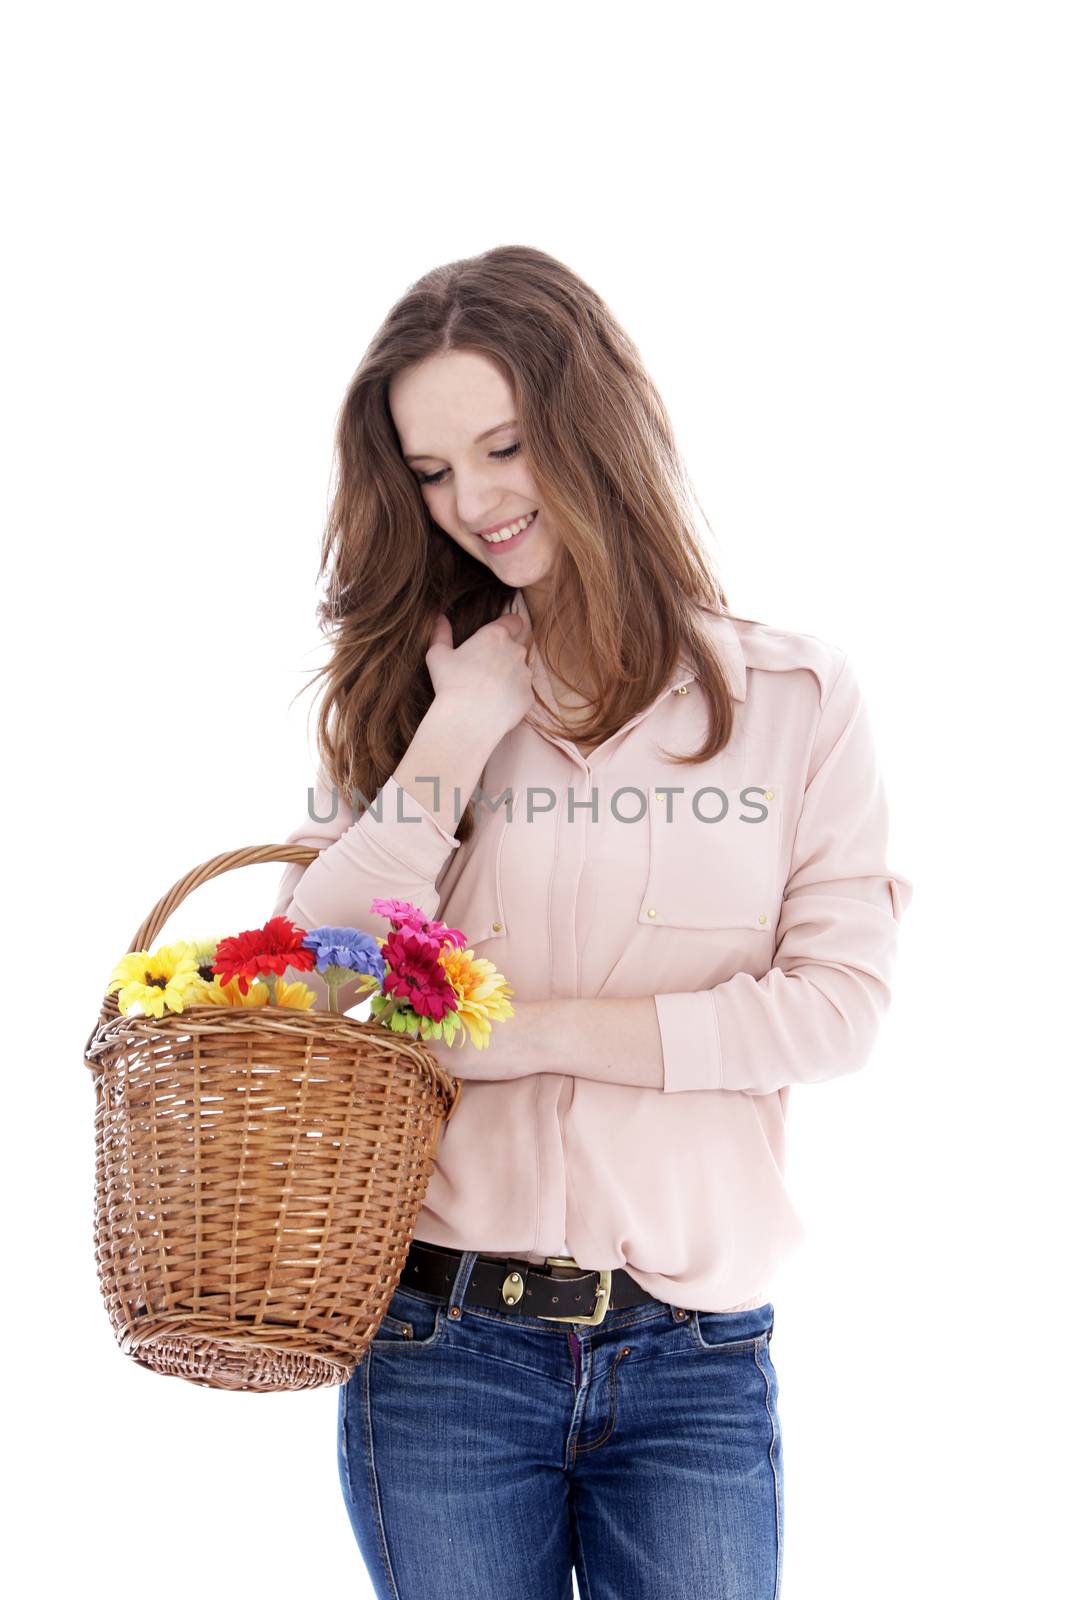 Smiling young teenage girl with a wicker basket of fresh flowers on her arm looking down at them with a smile, isolated on white